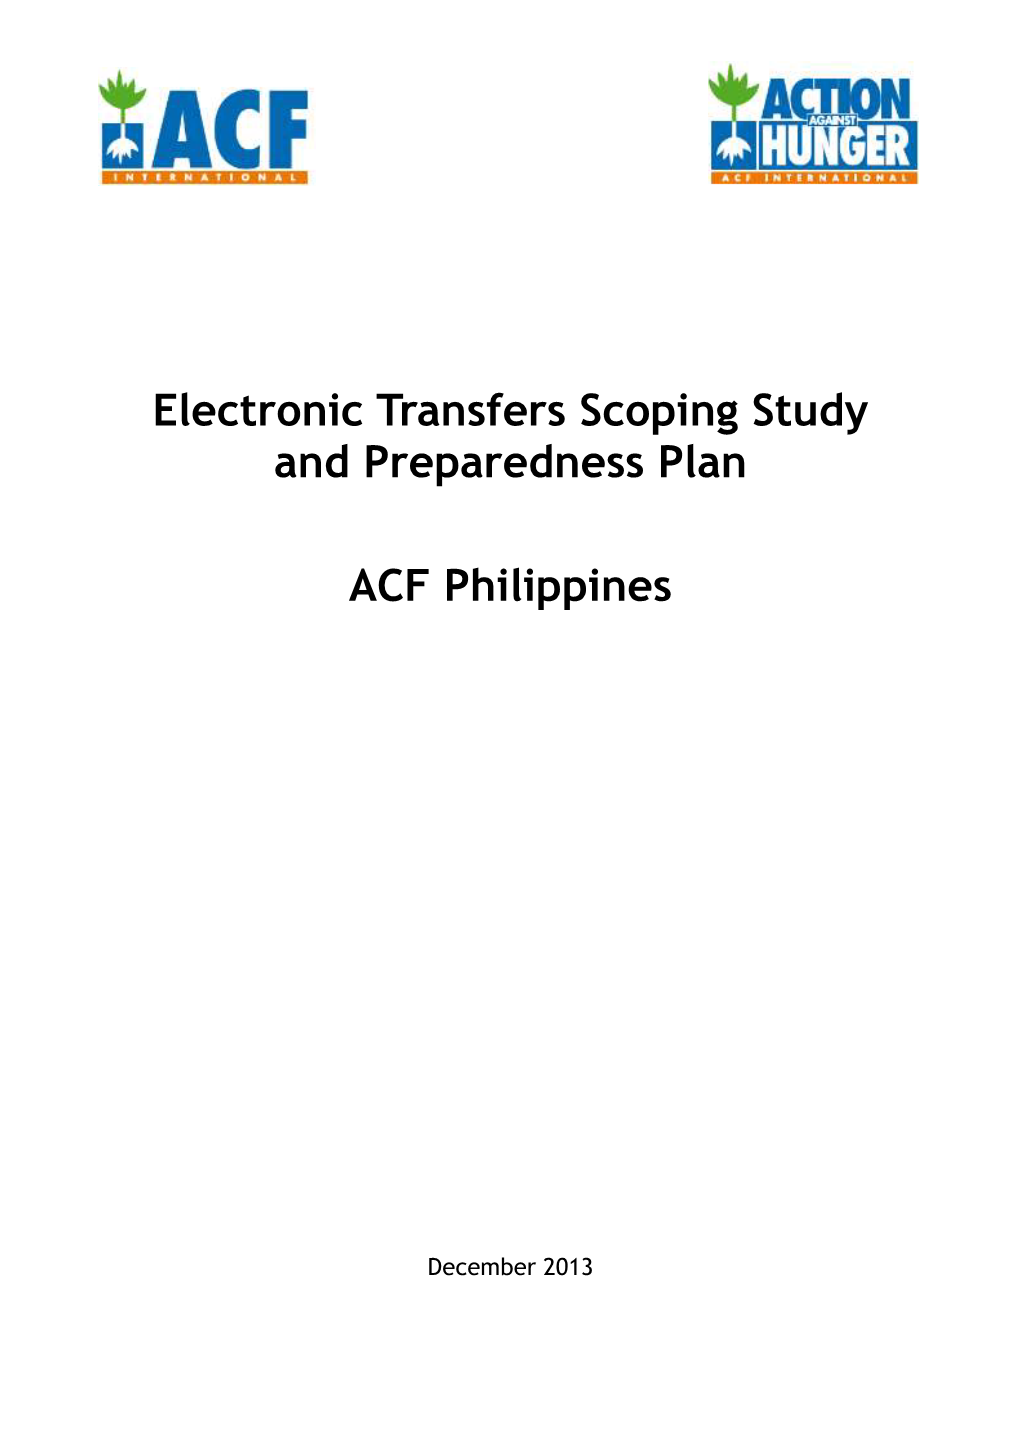 Electronic Transfers Scoping Study and Preparedness Plan ACF